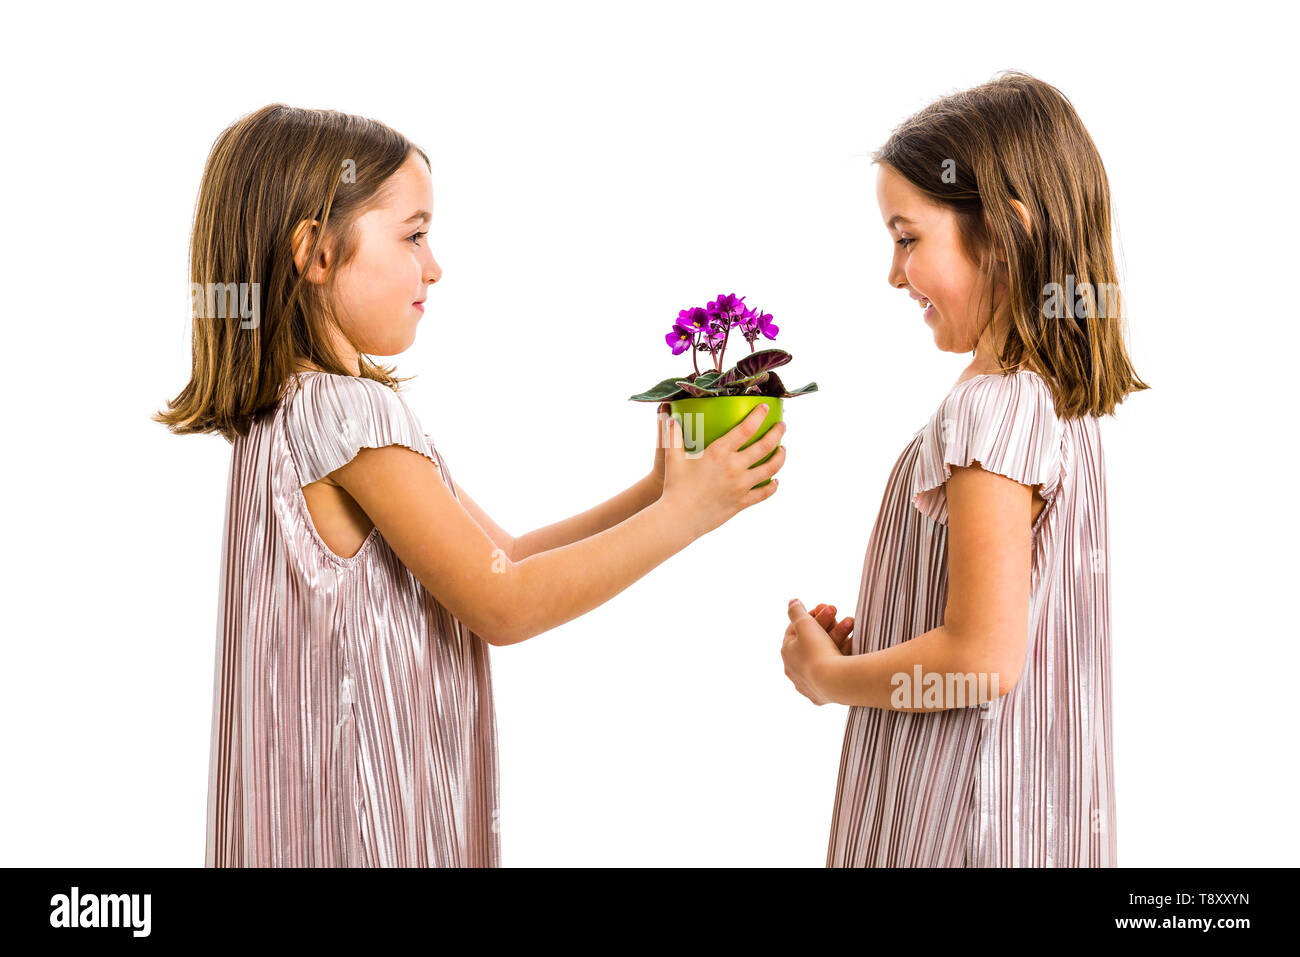 Identical twin girl giving viola flower pot to her sister. Little girl child is giving a gift or present of flowers to her sister. Profile view, studi Stock Photo